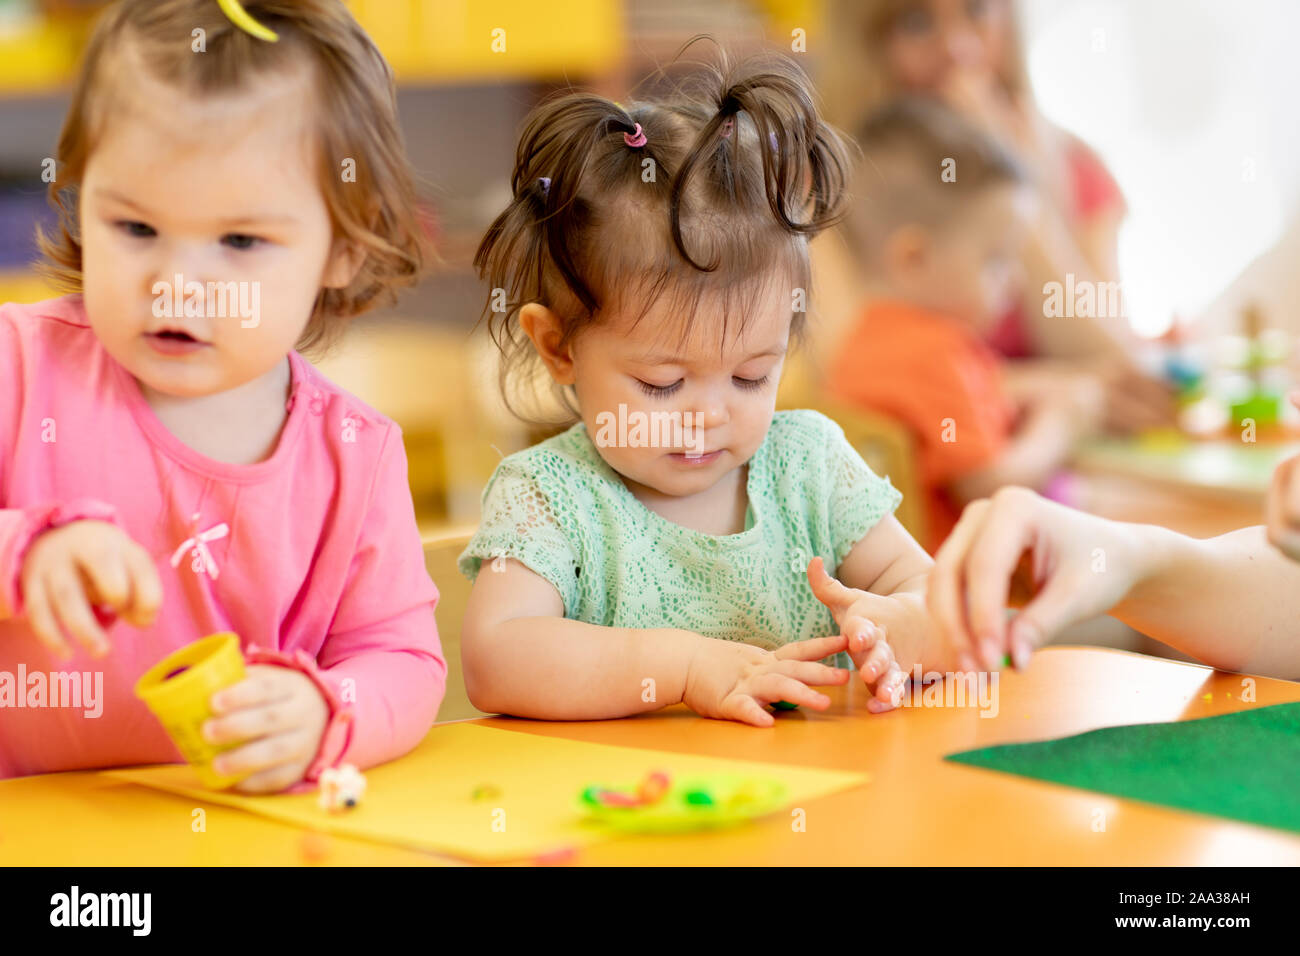 Little kids having fun together with colorful modeling clay at daycare. Children playing with plasticine or dough. Stock Photo